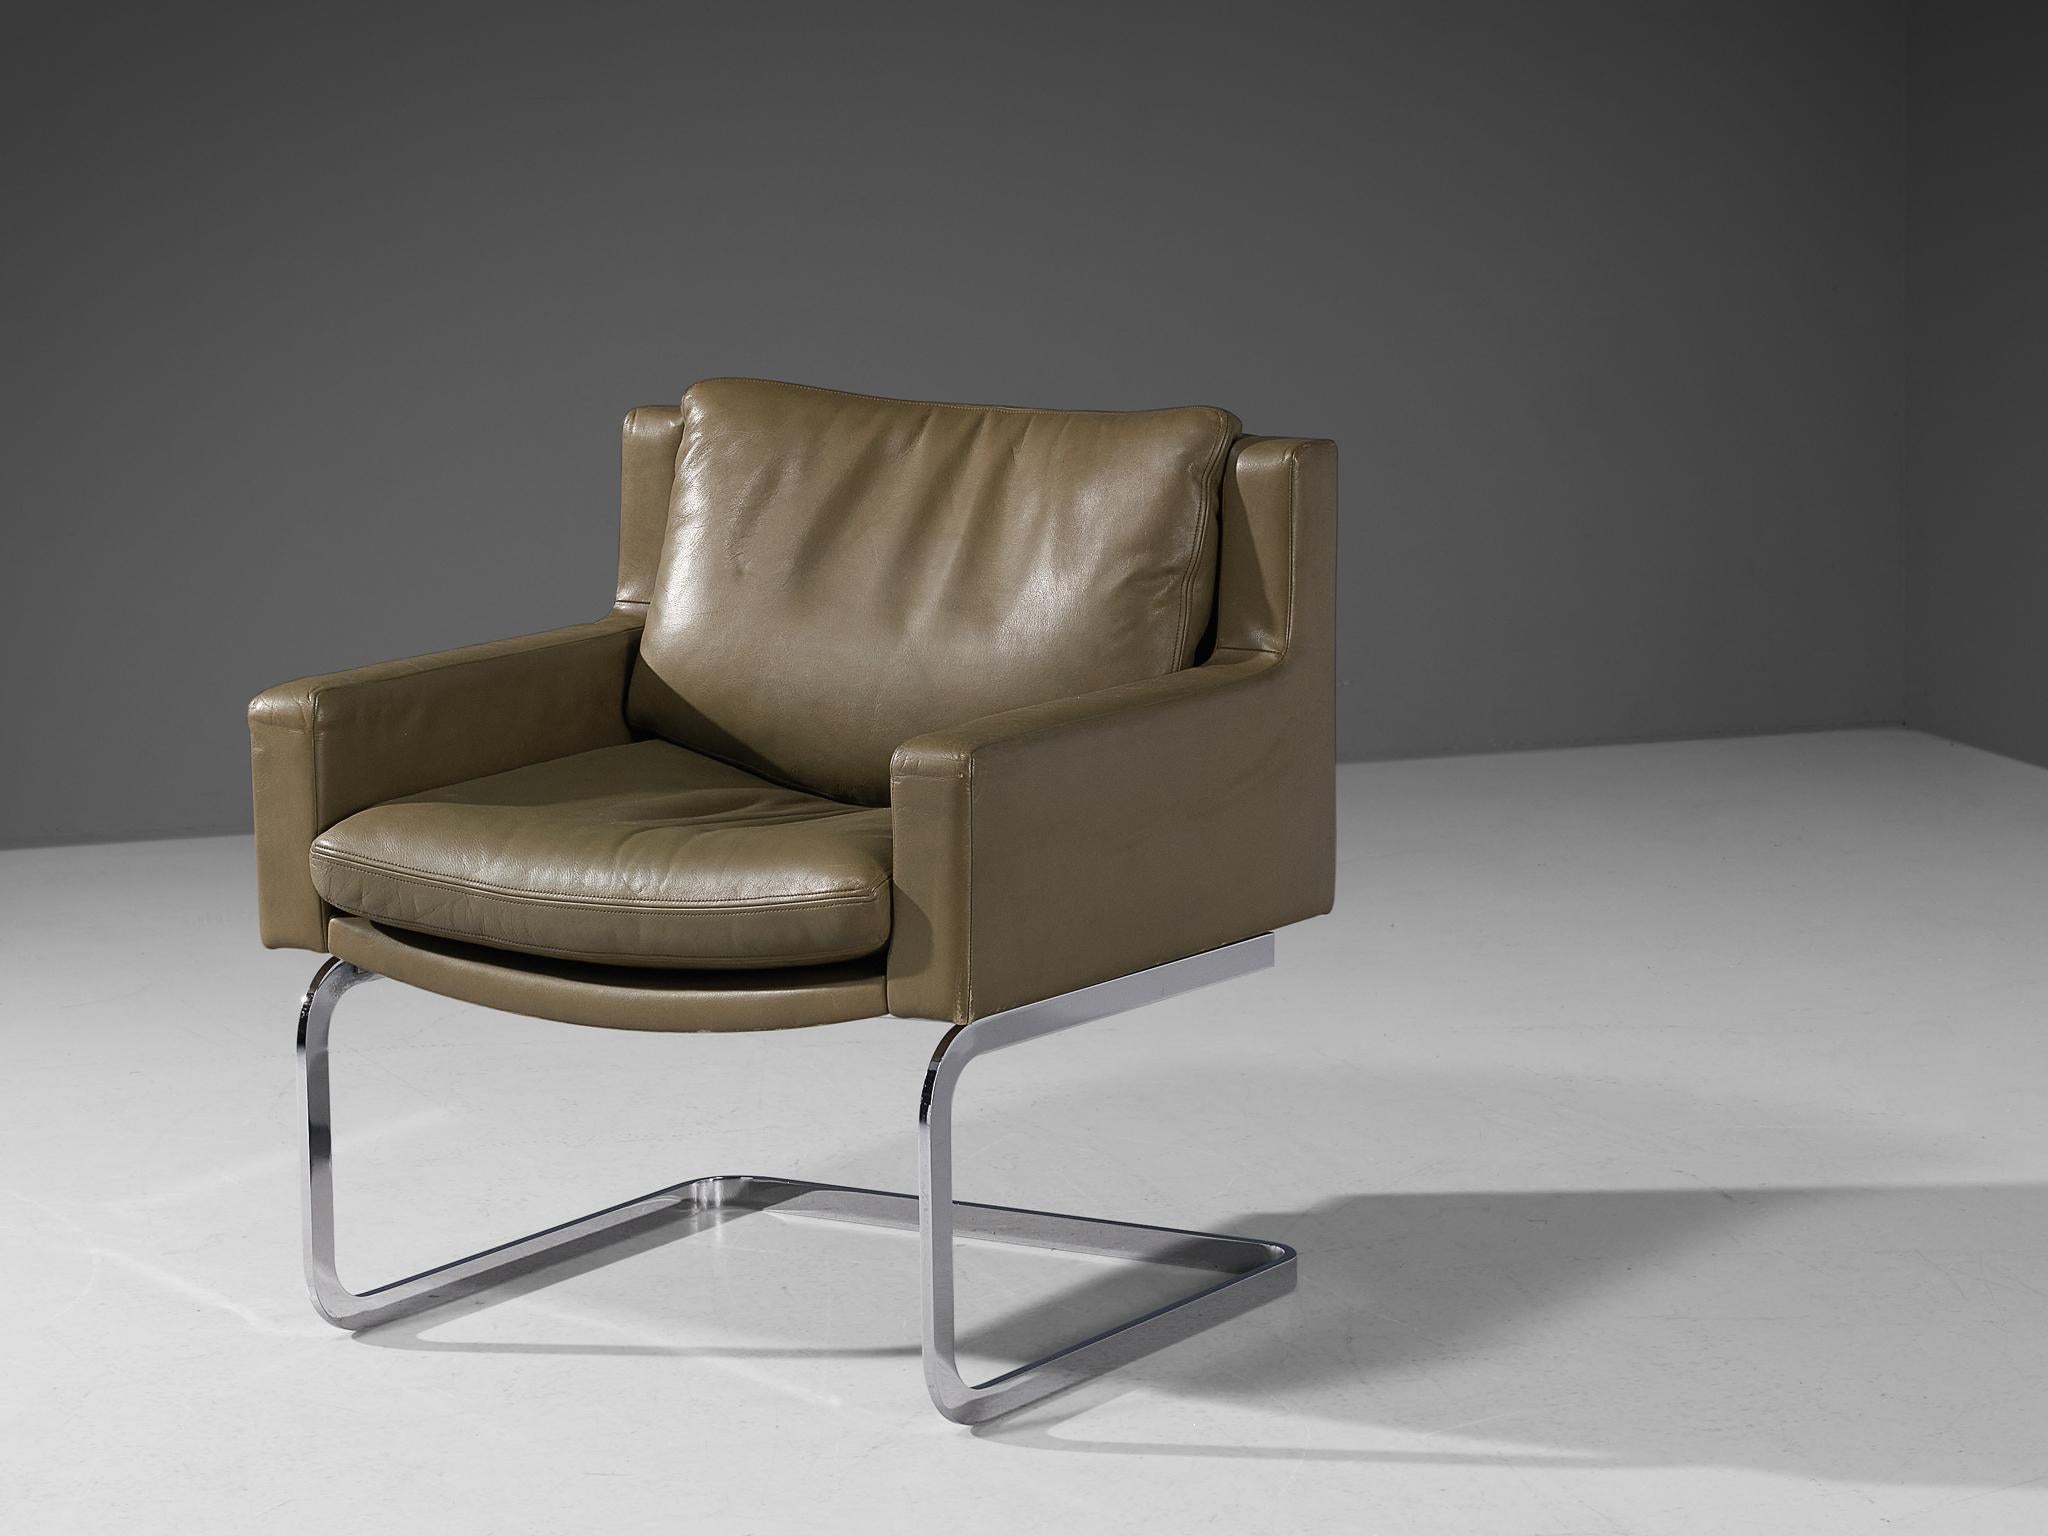 Robert Haussmann for De Sede, armchair model 'DS-201', chrome-plated metal, leather, Switzerland, designed in 1957 

A design by Robert Haussmann that features a cubic shaped structure. The backrest runs into the armrests by means of a right-angled